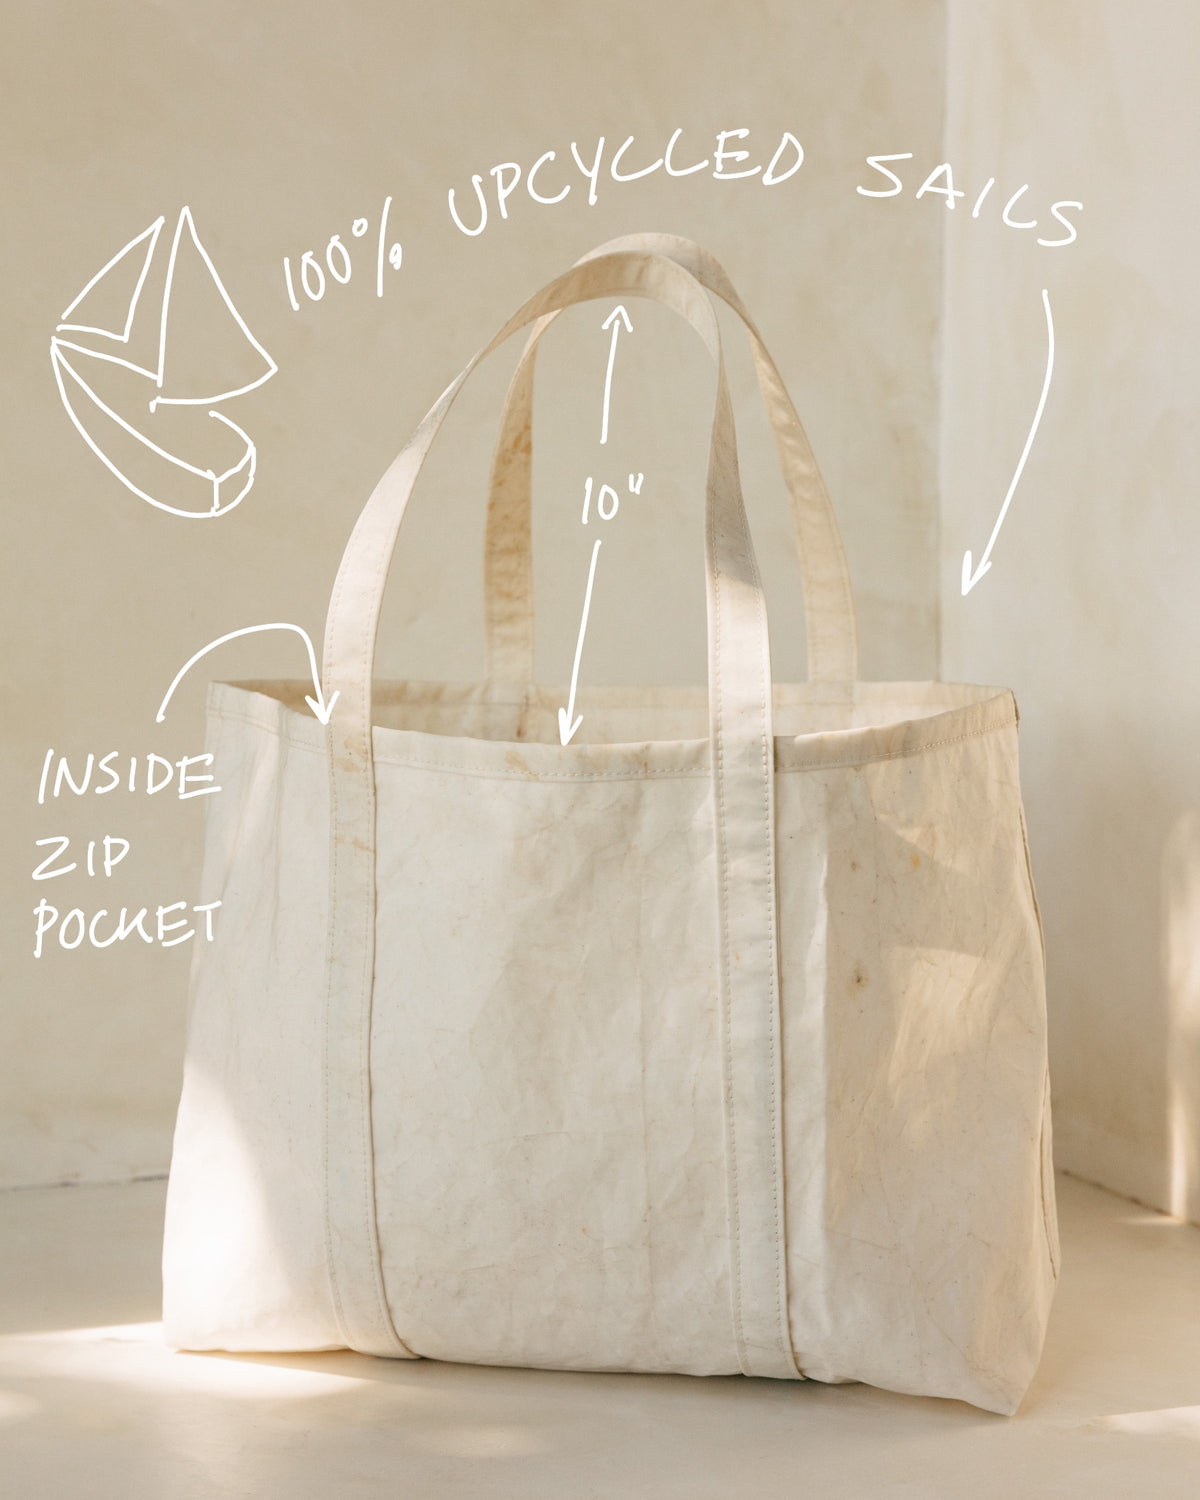 Beach Tote in Upcycled Sailcloth